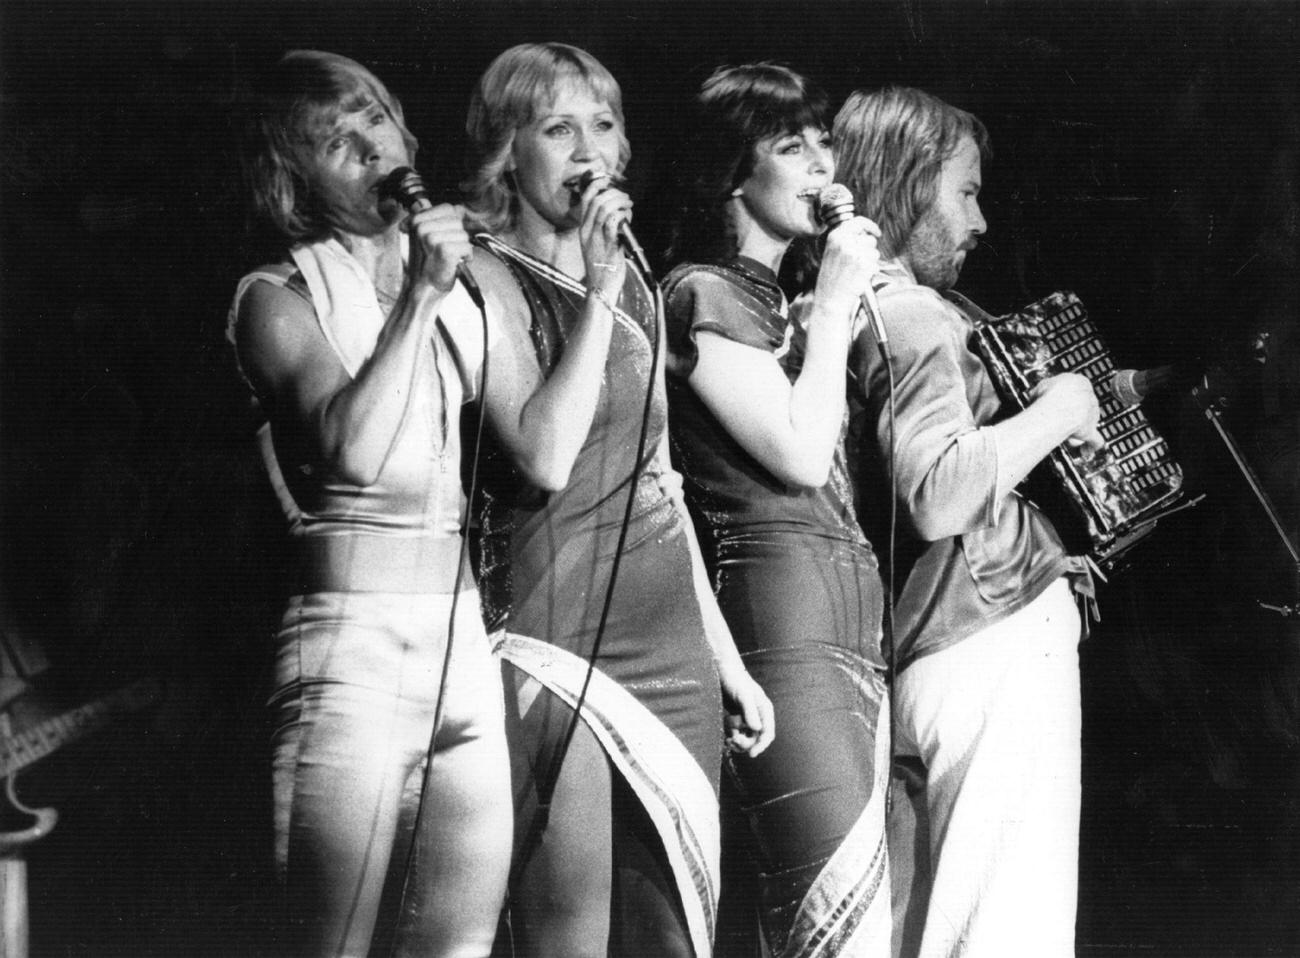 Abba (left to right) Bjorn Ulvaeus, Agnetha Faltskog, Anni-Frid Lyngstad and Benny Andersson, in concert, 1979